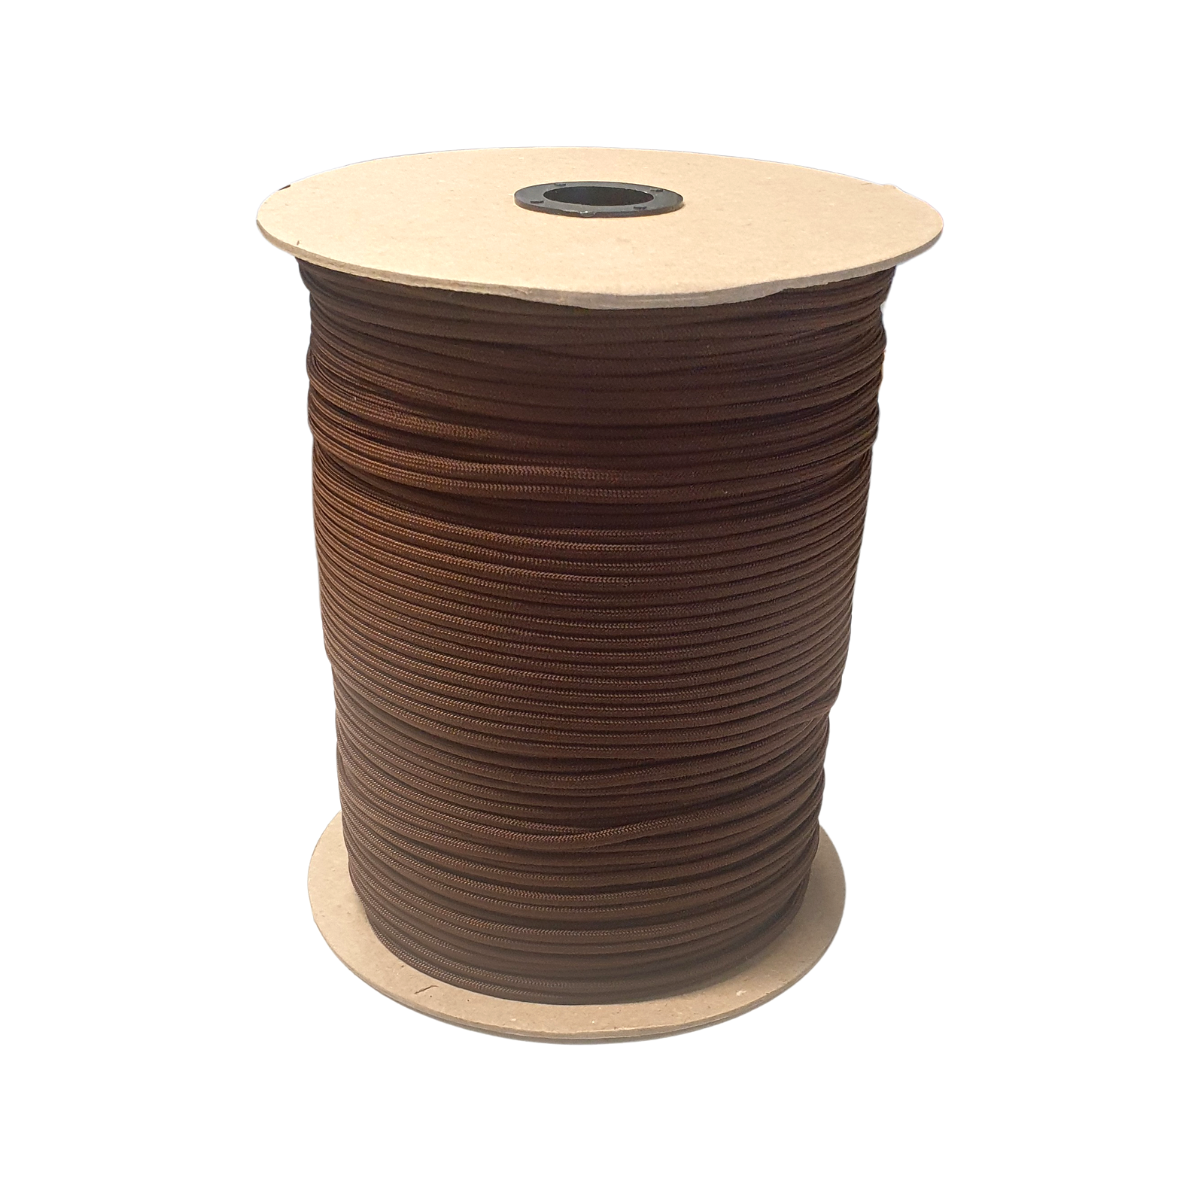 SPOOL 1000ft Paracord Walnut 550 7 Strand Made in USA